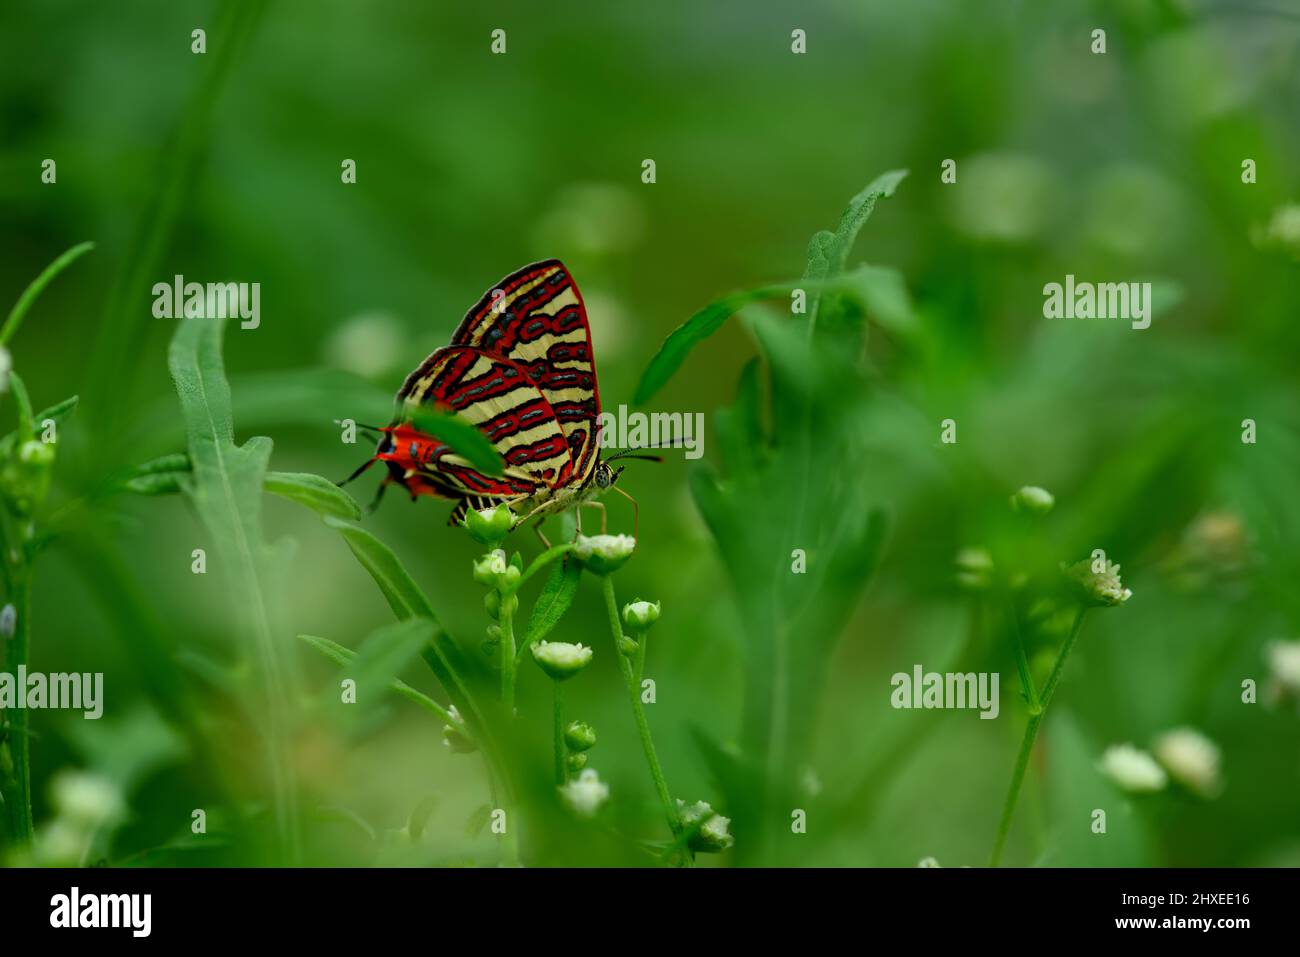 Beautiful peacock pansy butterfly or junonia almana is sitting on a green leaf in a tropical rainforest, west bengal, india stock photo Stock Photo